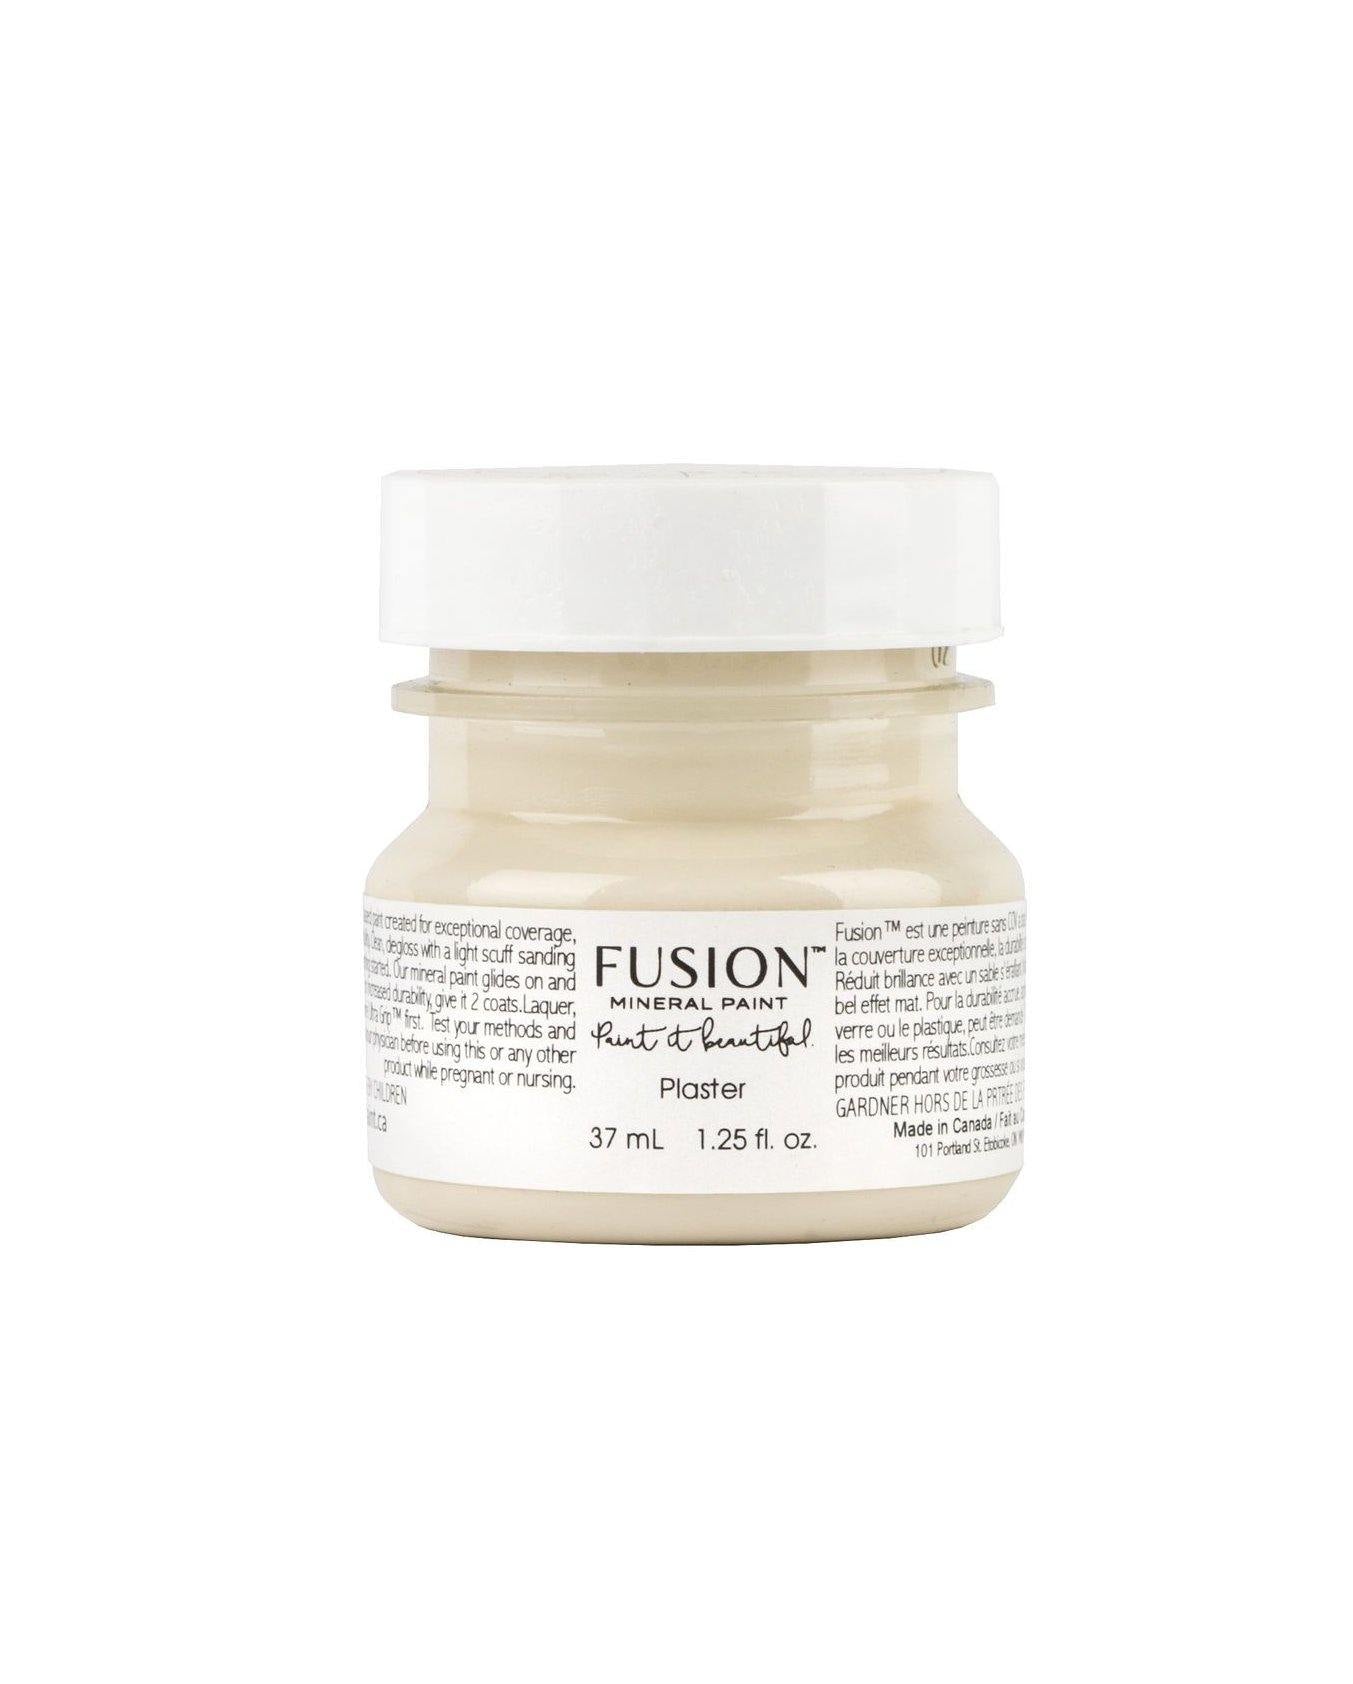 Fusion Mineral Paint Plaster Tester